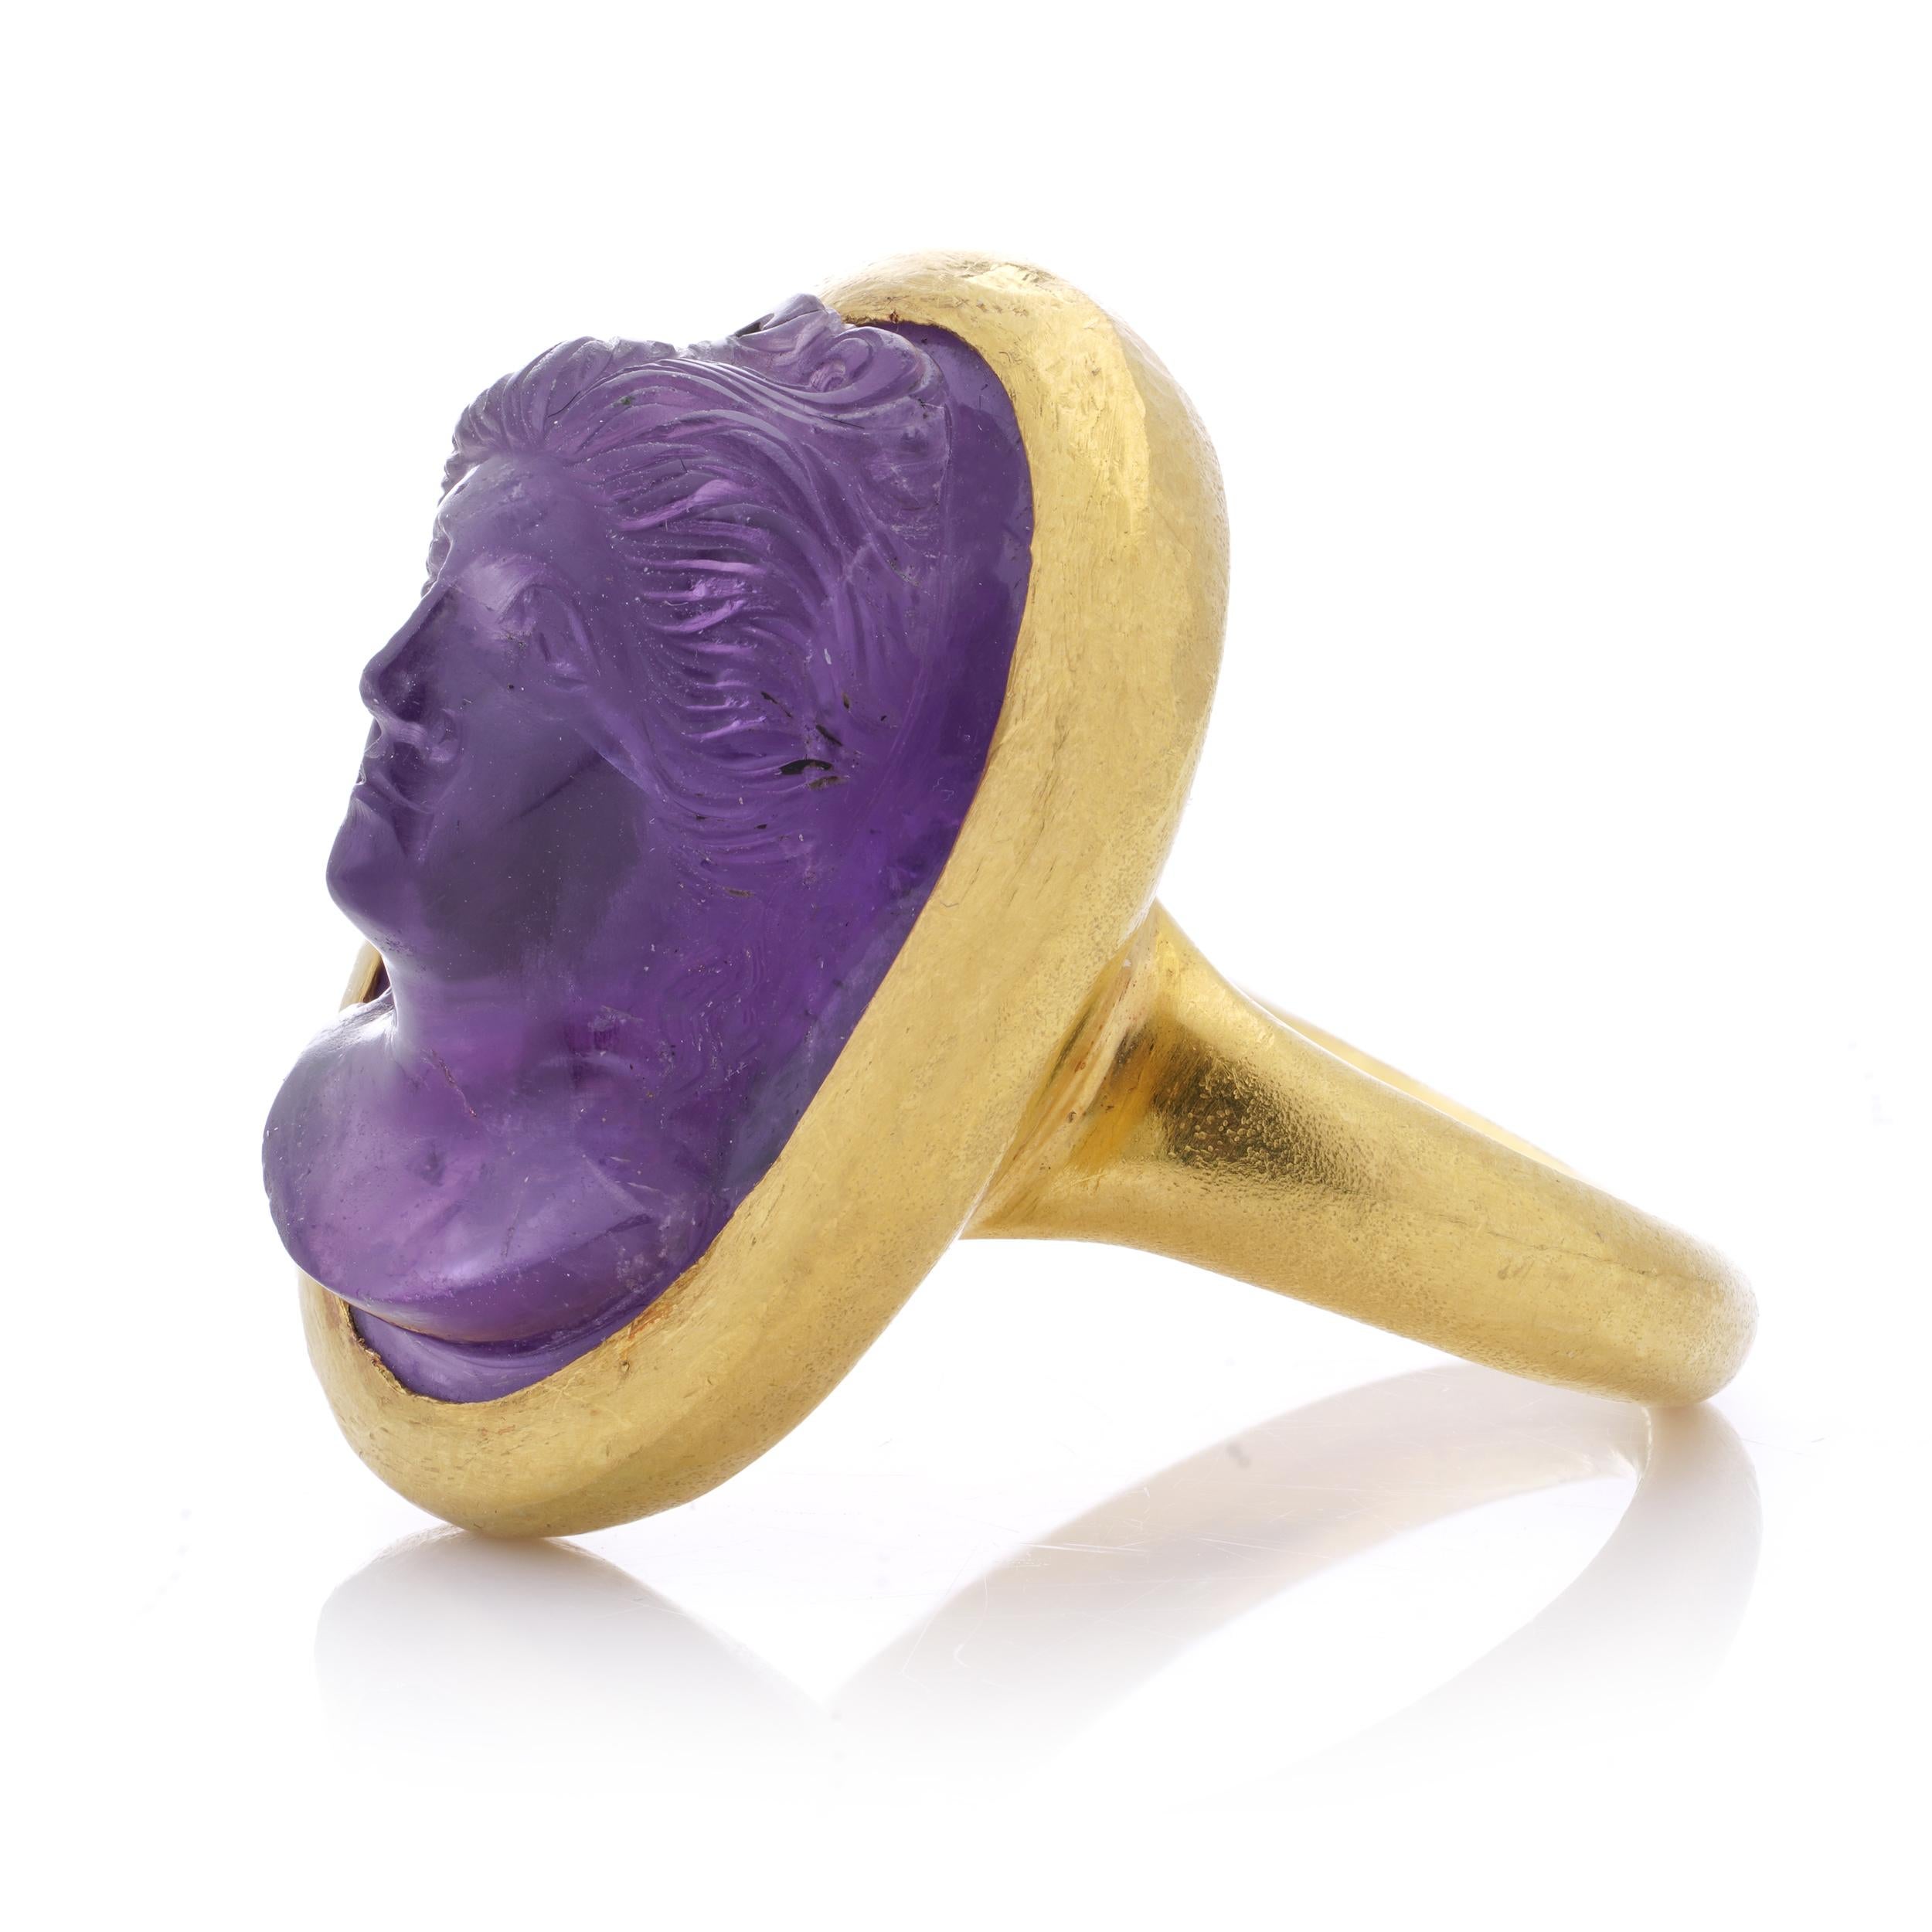  24kt. yellow gold carved amethyst intaglio ring with a woman's portrait For Sale 7